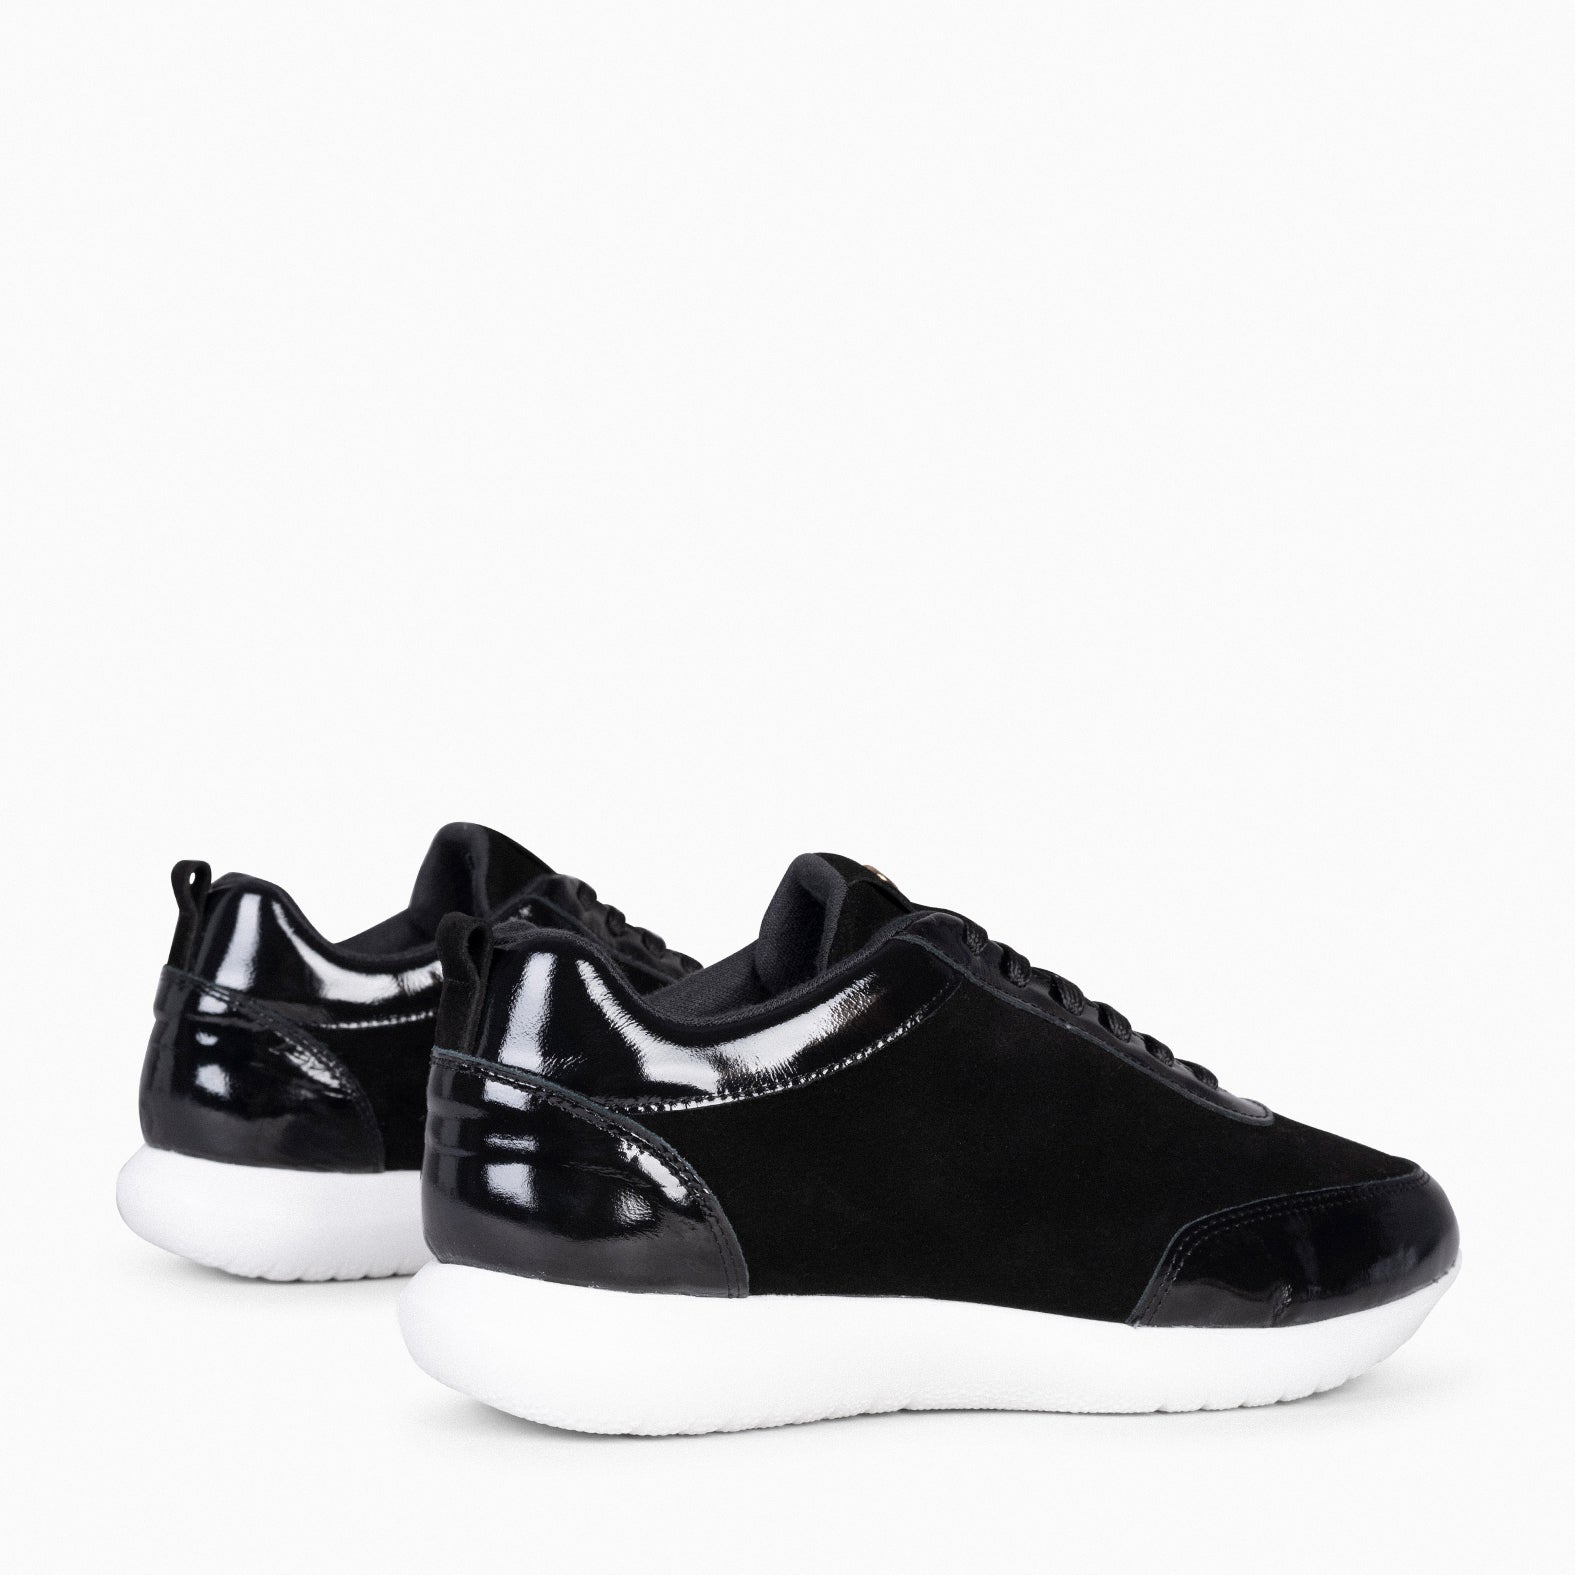 LOIRA - BLACK Sneakers with Patent Leather